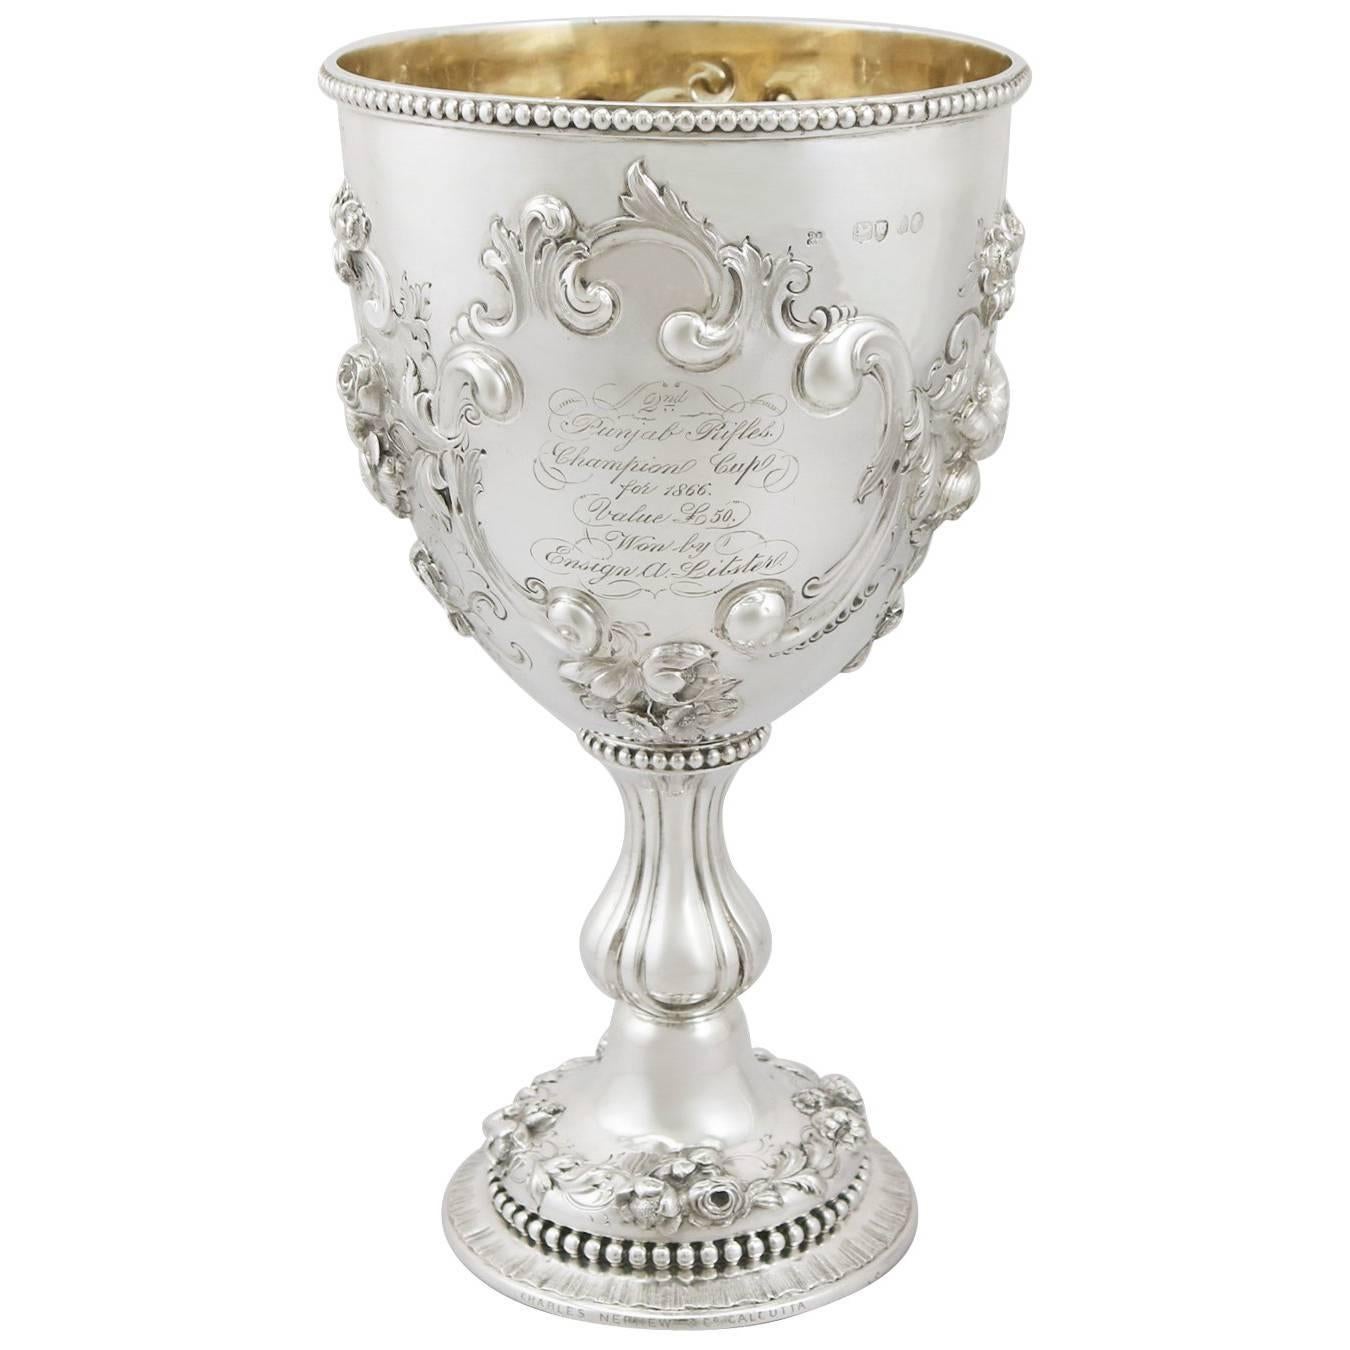 1860s Antique Victorian Sterling Silver Presentation Cup